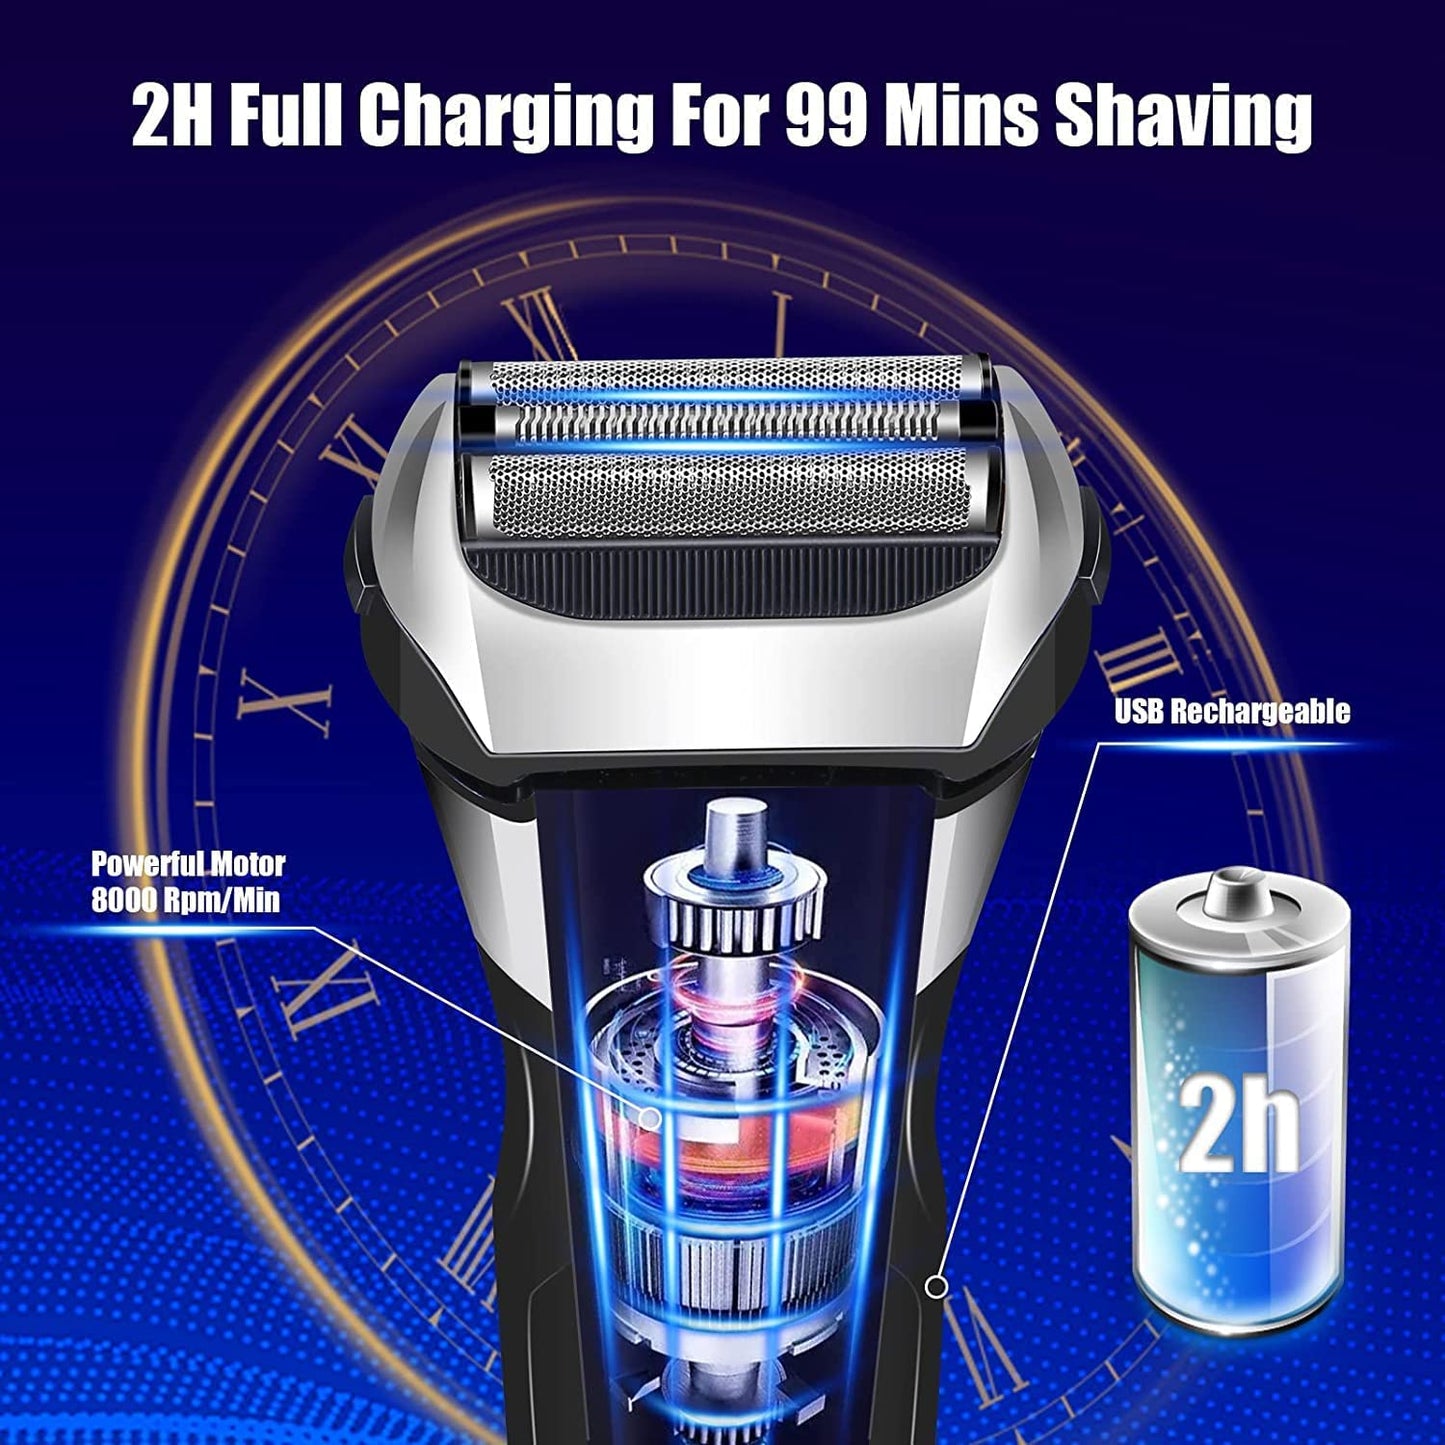 Electric Shavers Men, MAKINGTEC Wet & Dry Men's Electric Shaver, Cordless Foil Razor with USB Charging and Pop-Up Trimmer, IPX7 Waterproof Shaver Electric Razor Shavers for Men, Best Gifts for Men